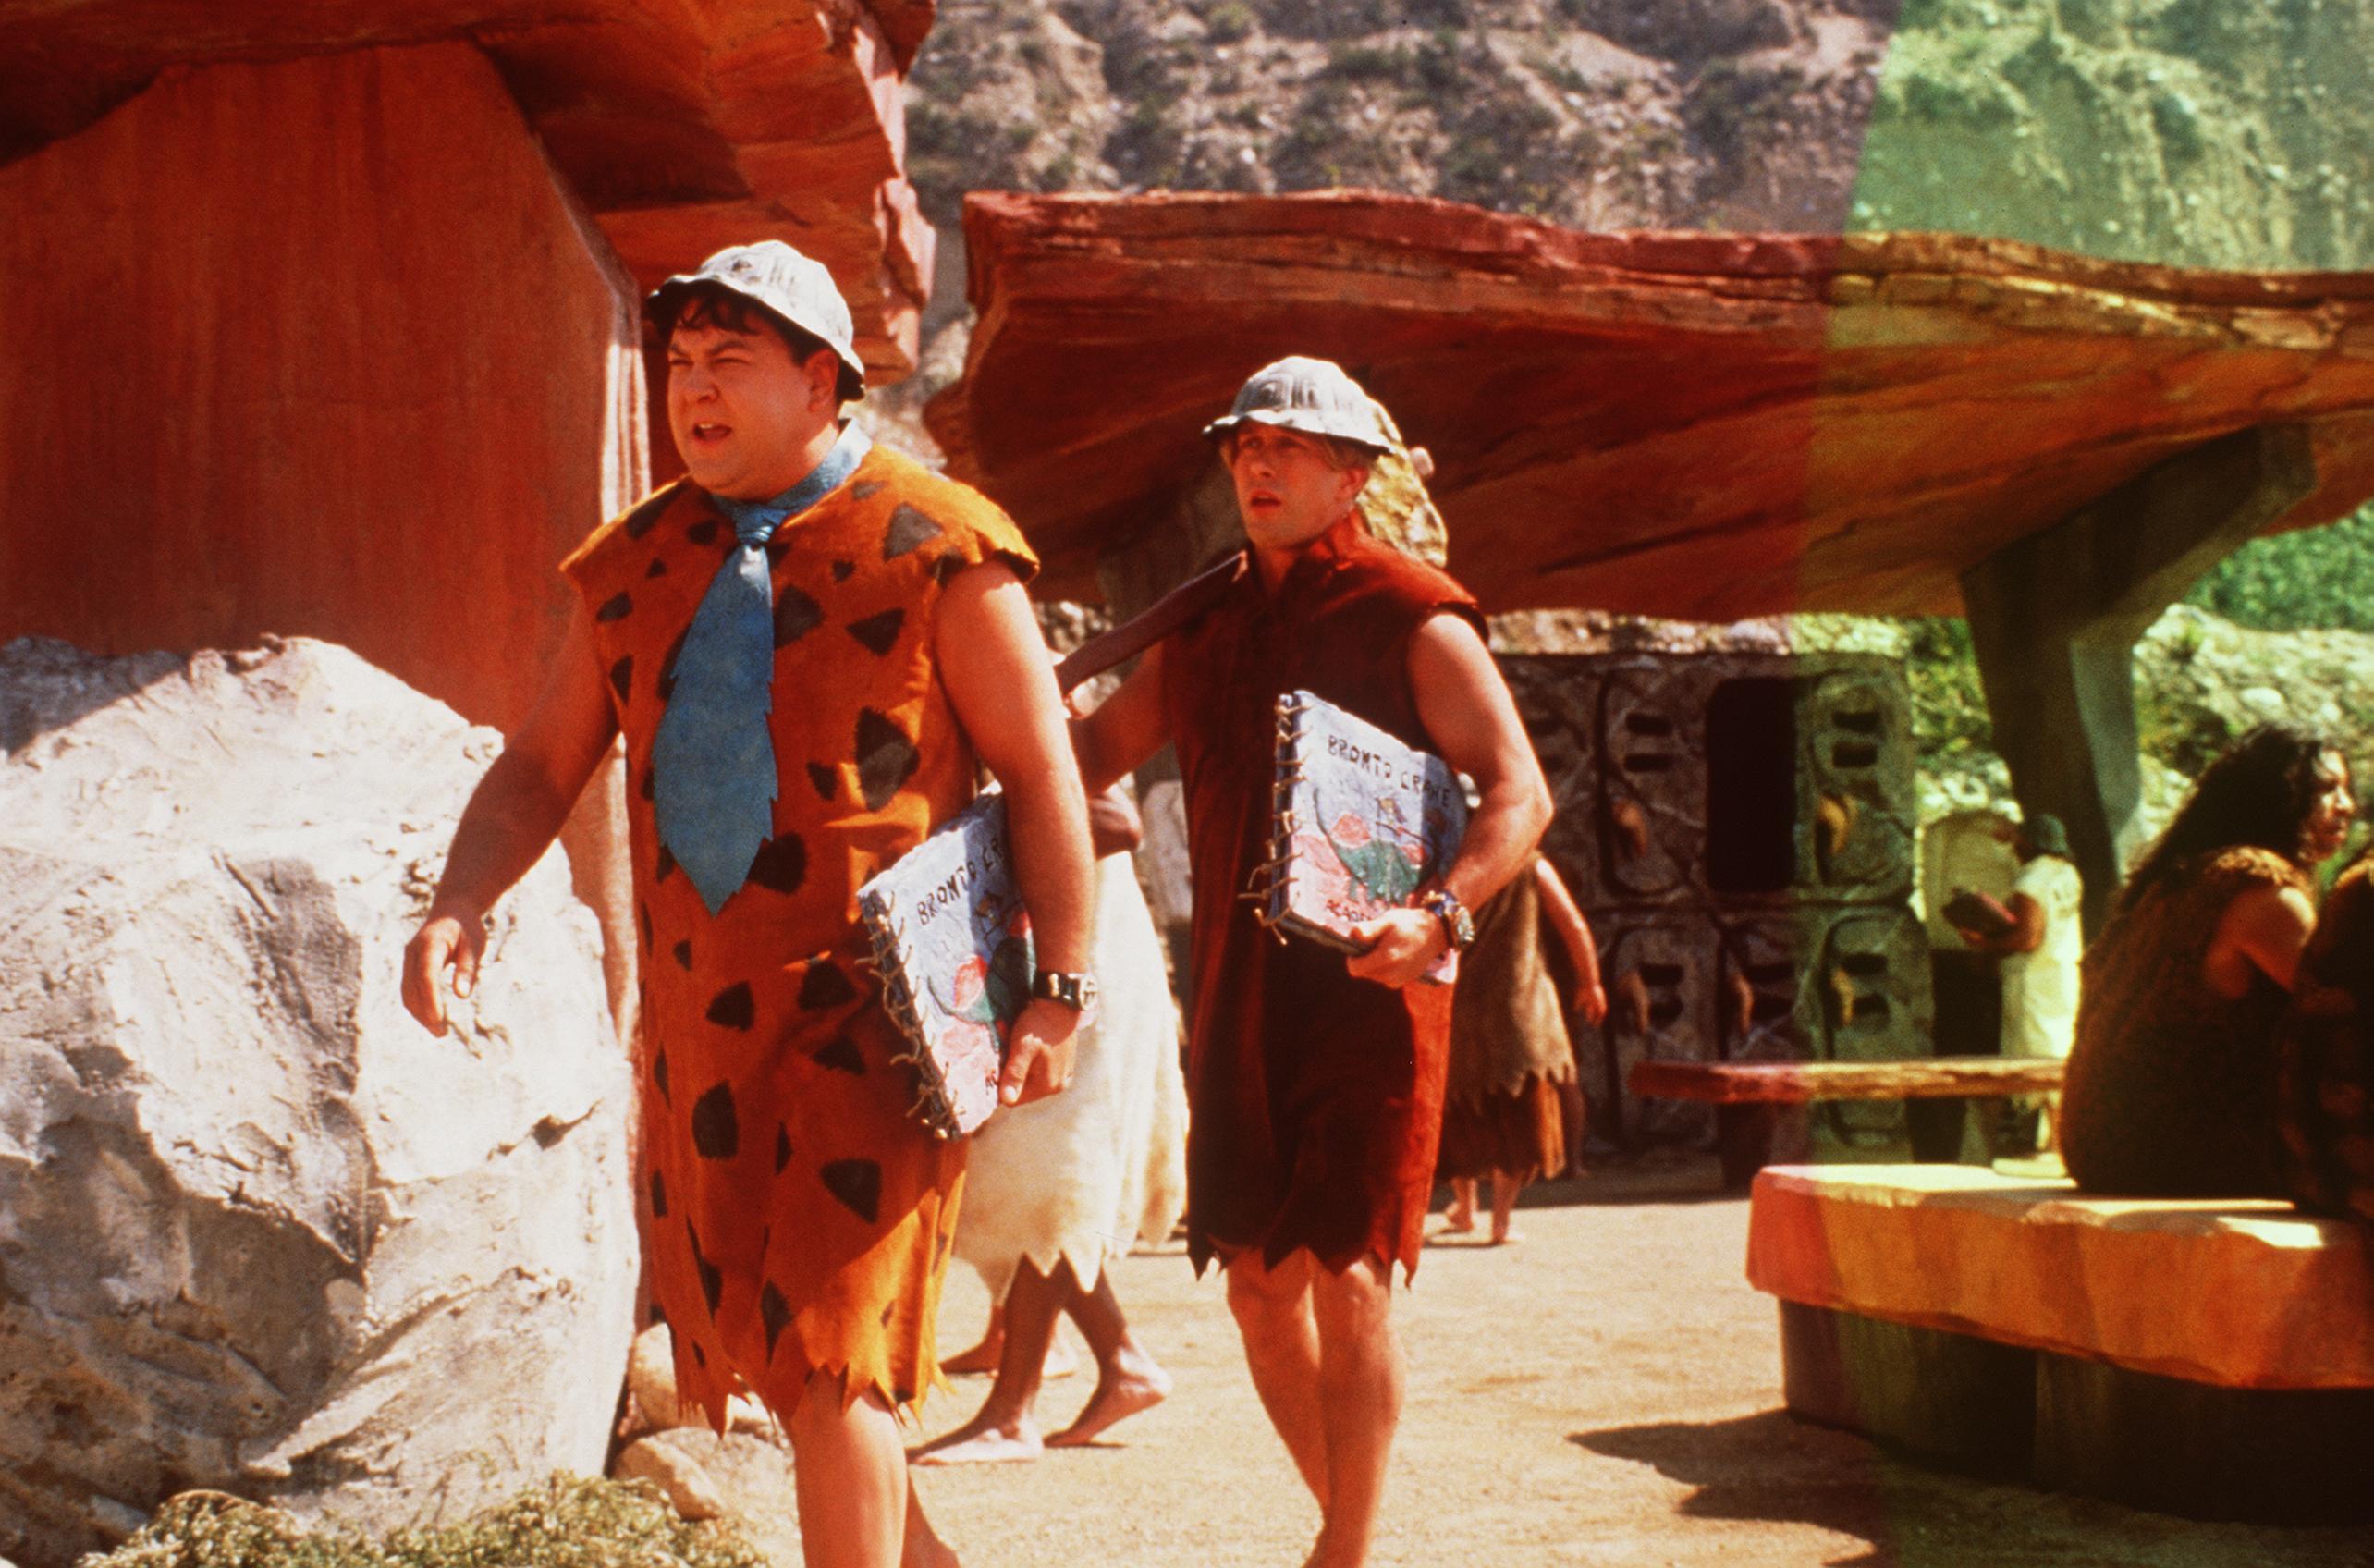 Fred Flintstone and Barney Rubble walk through the quarry, in the live-action move, 'The Flintstones' in Viva Rock Vegas